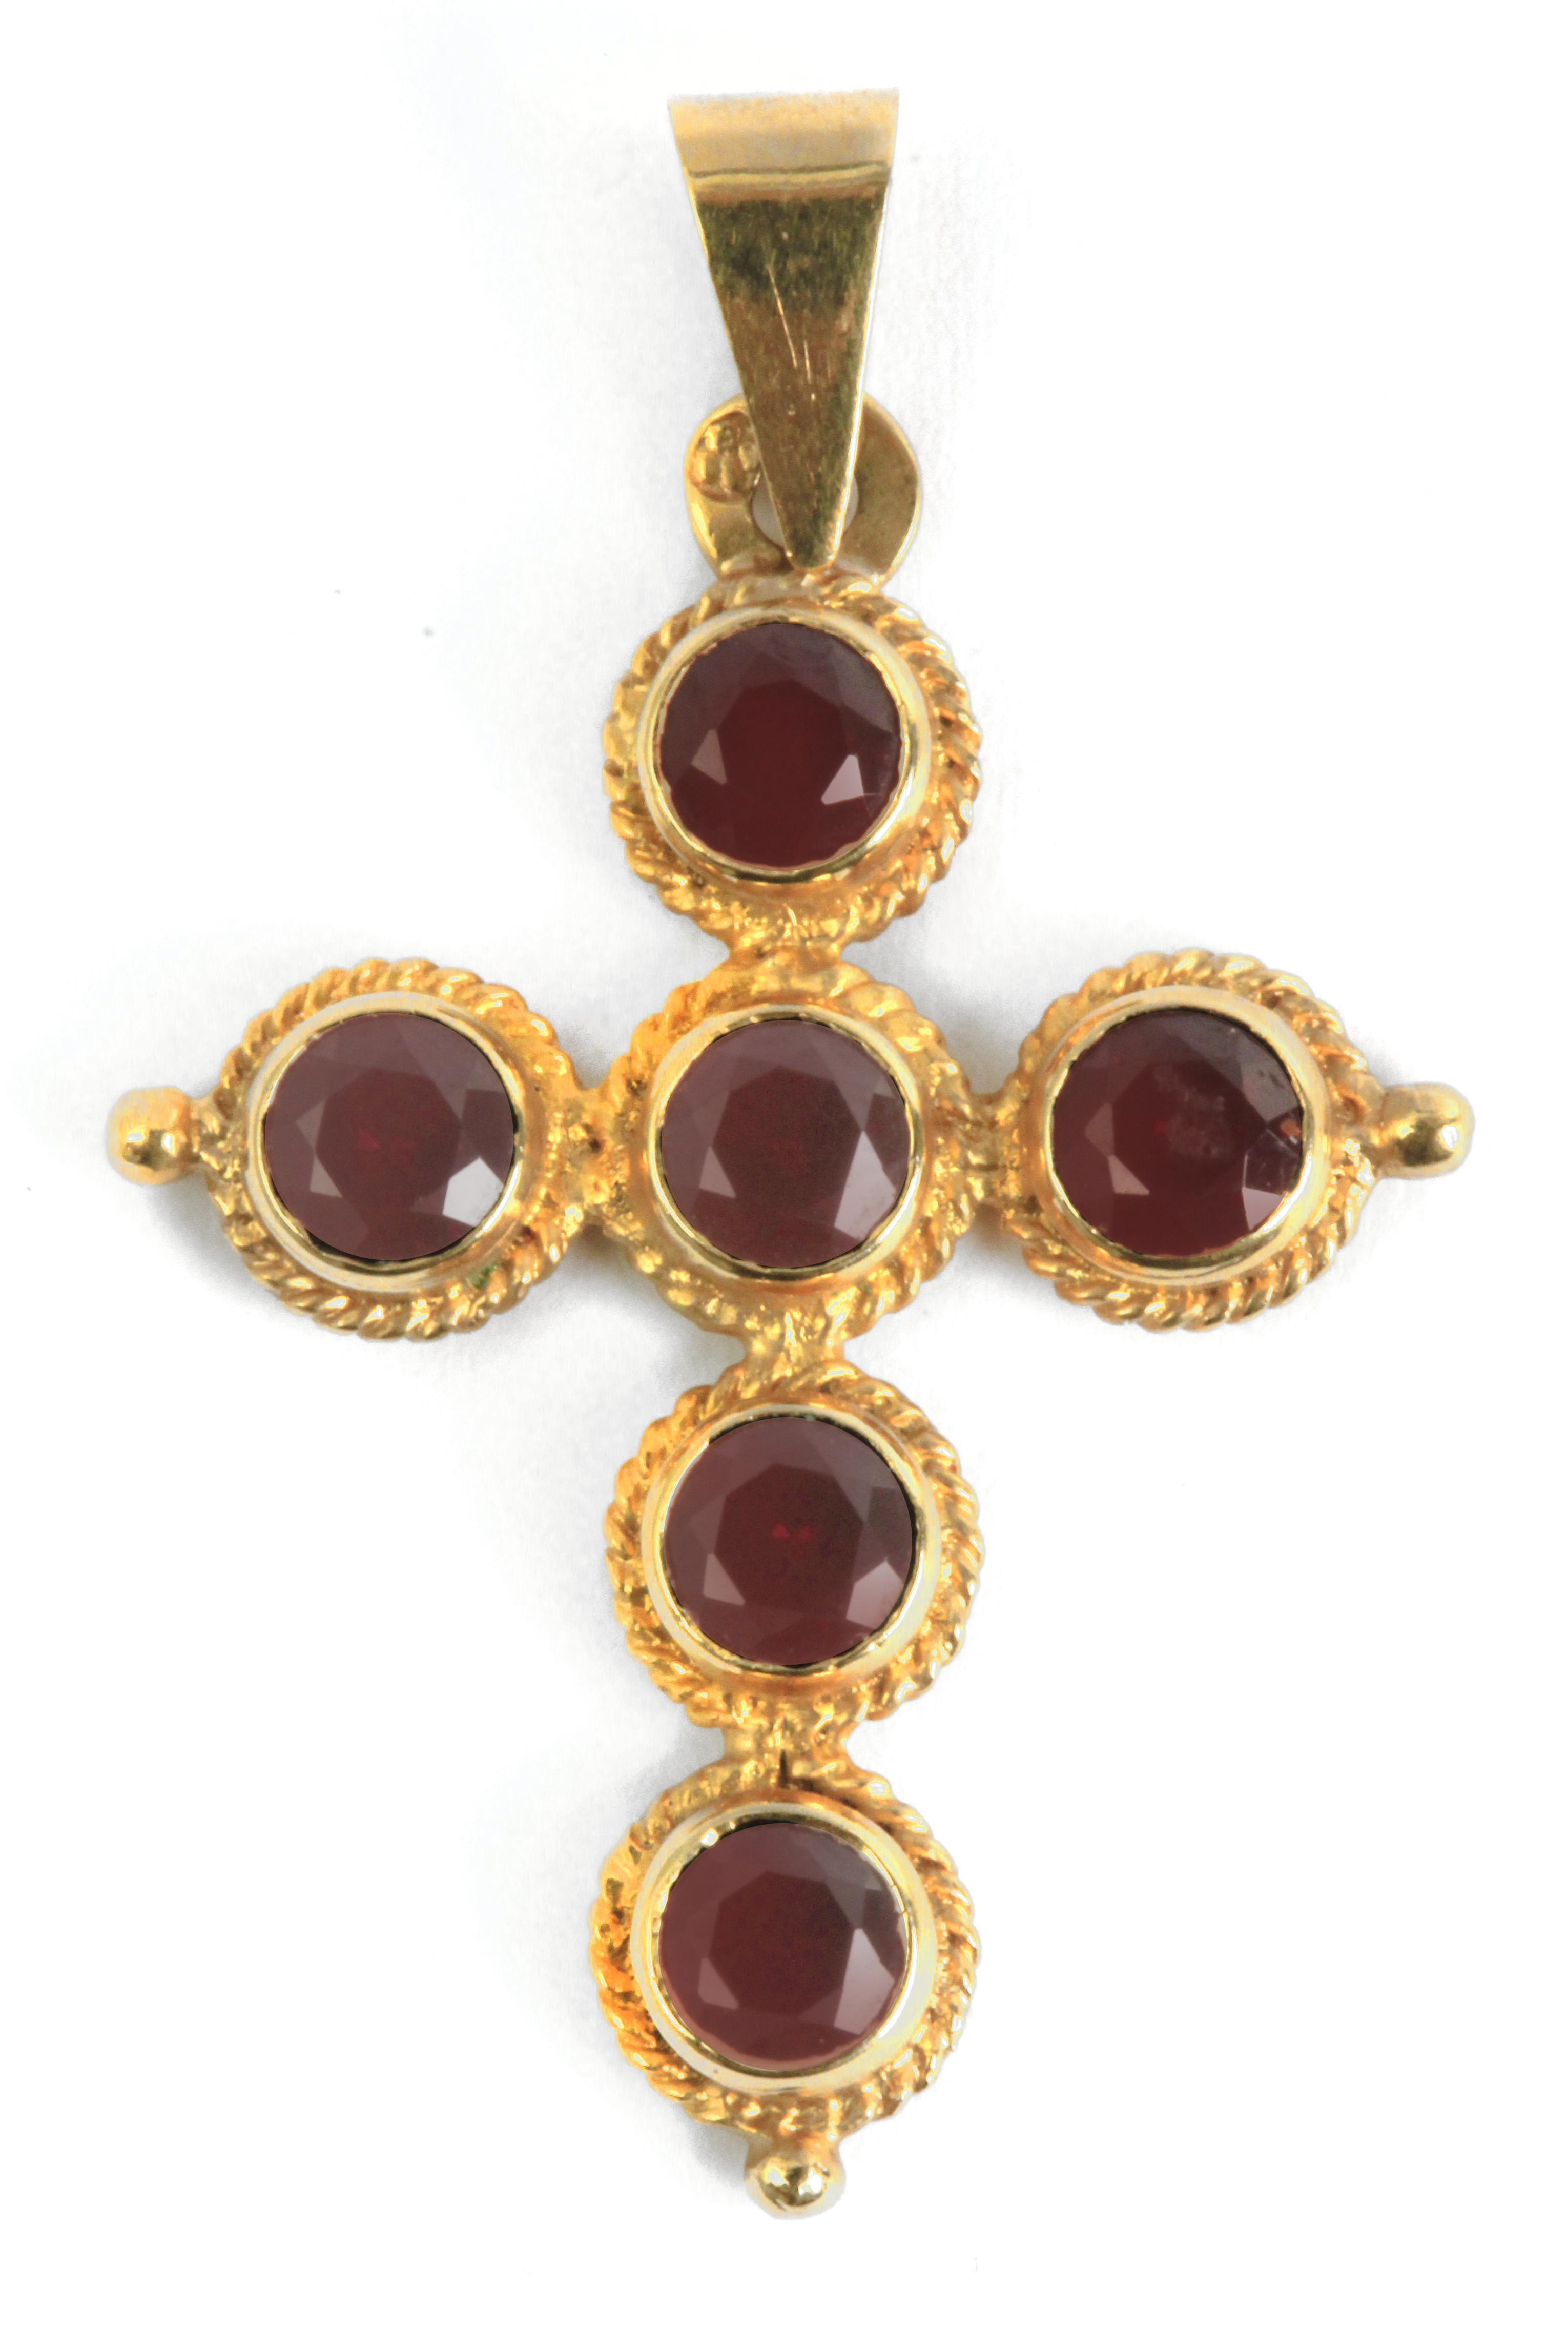 A pendant cross with an 18k. yellow gold setting and round brilliant cut almandine garnets